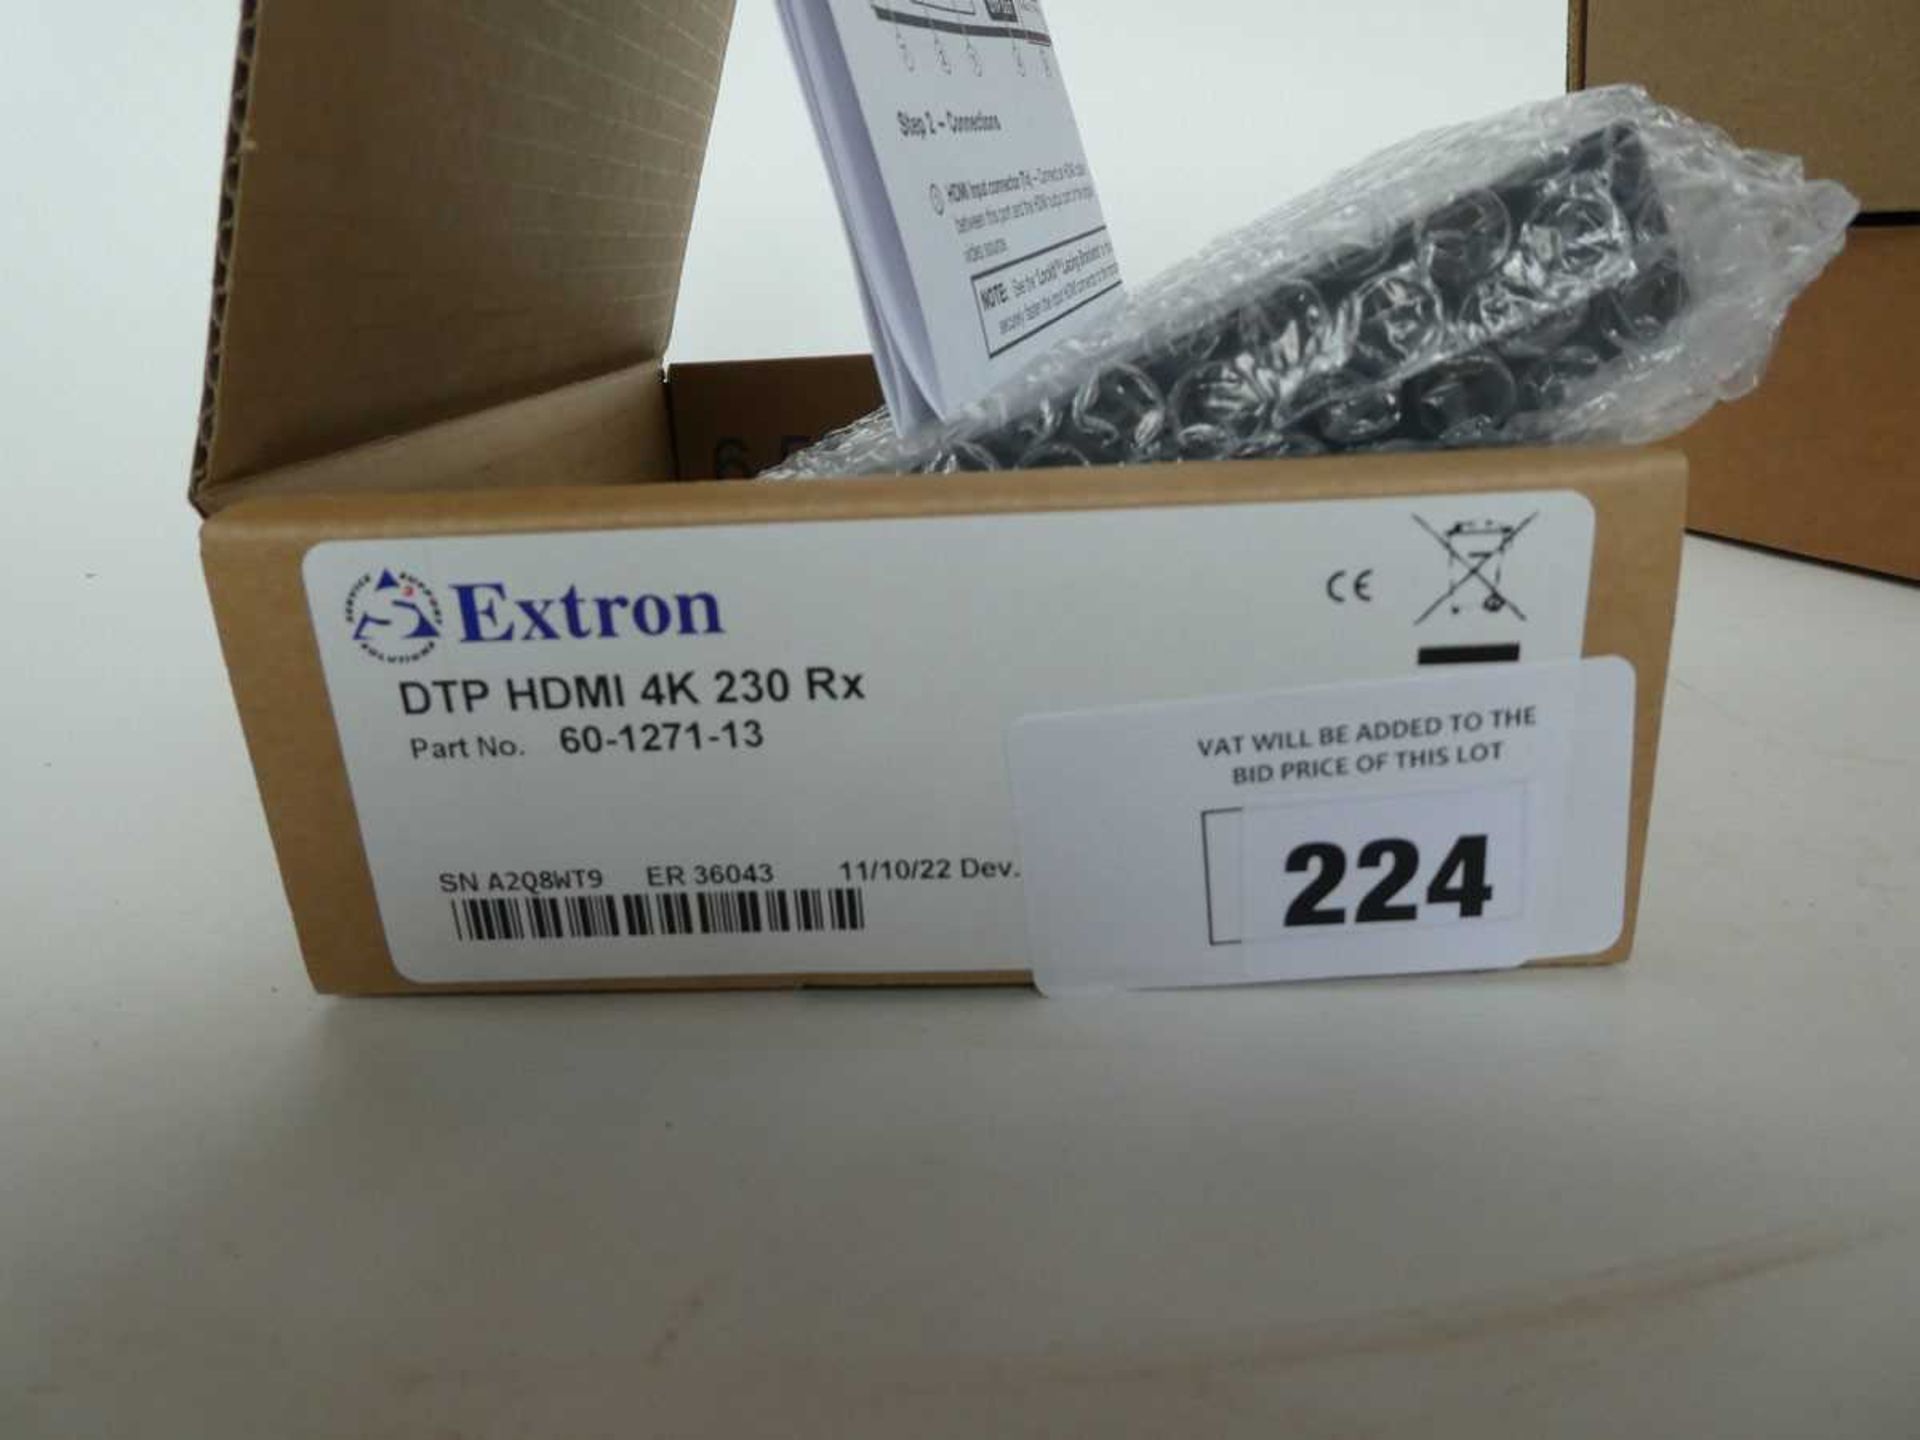 +VAT Extron DTP HDMI 4K 230 RX receiver with box and instructions